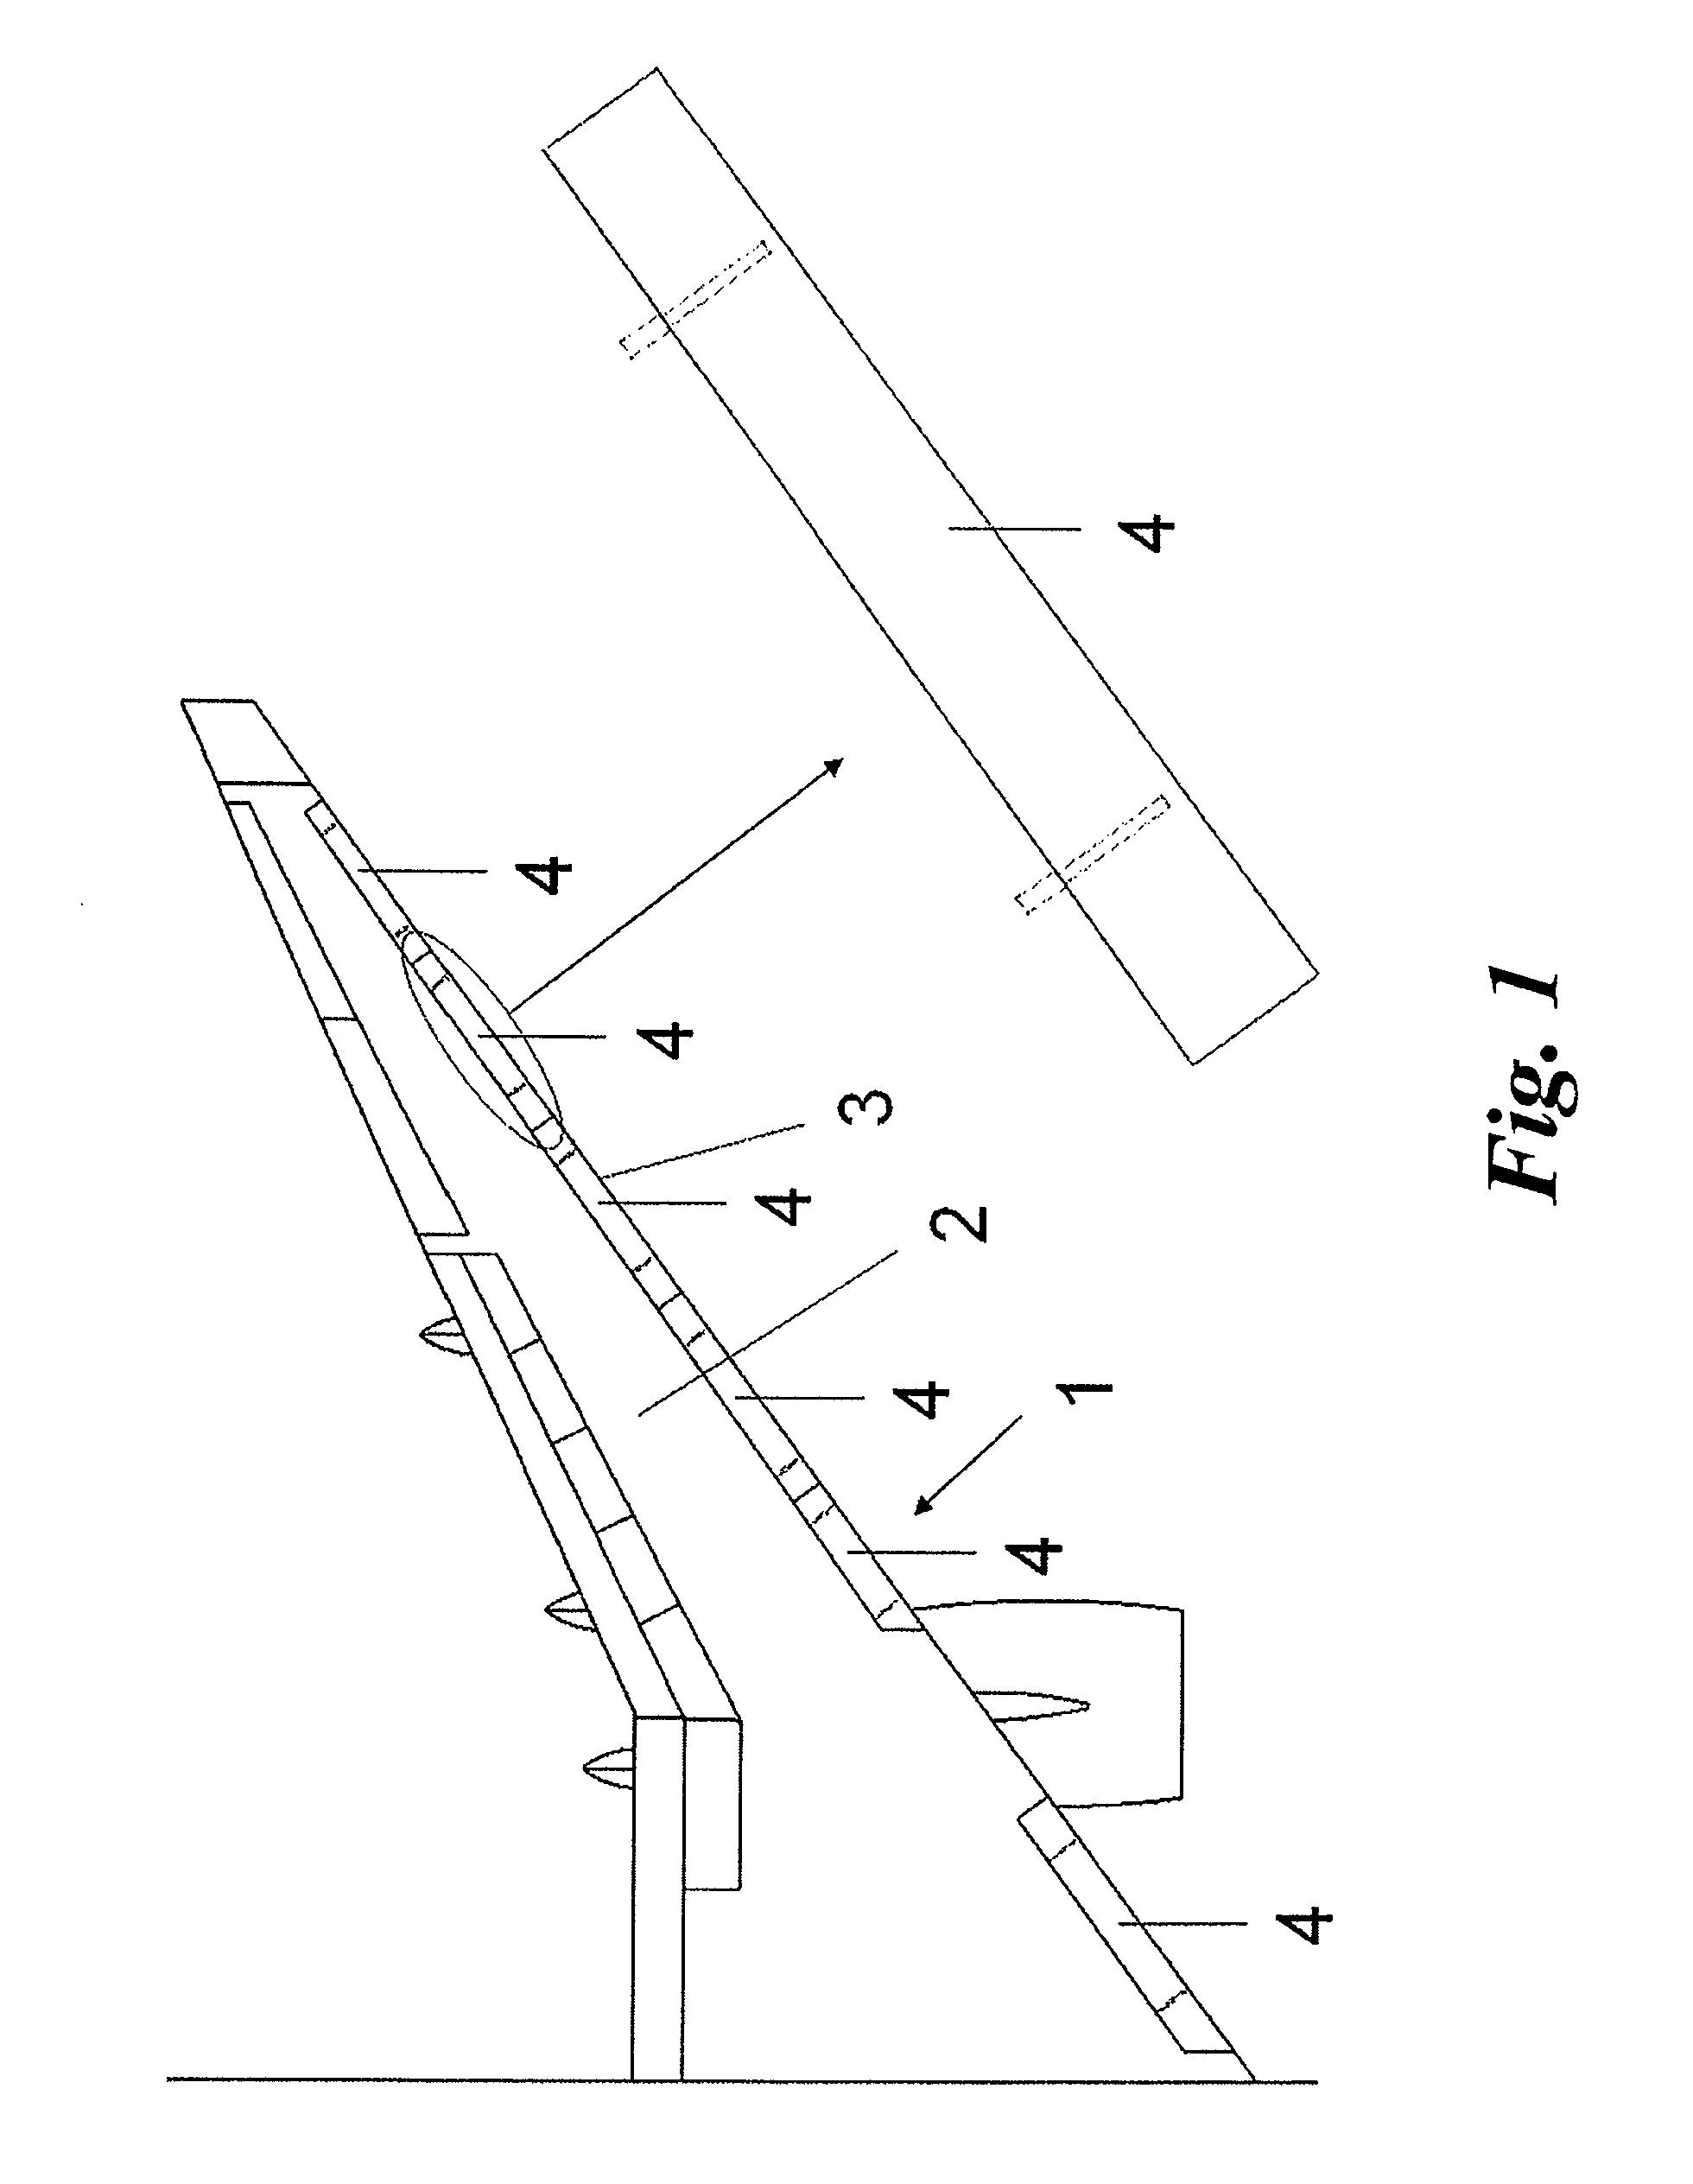 High-lift device track having a U-shaped to H-shaped cross-section